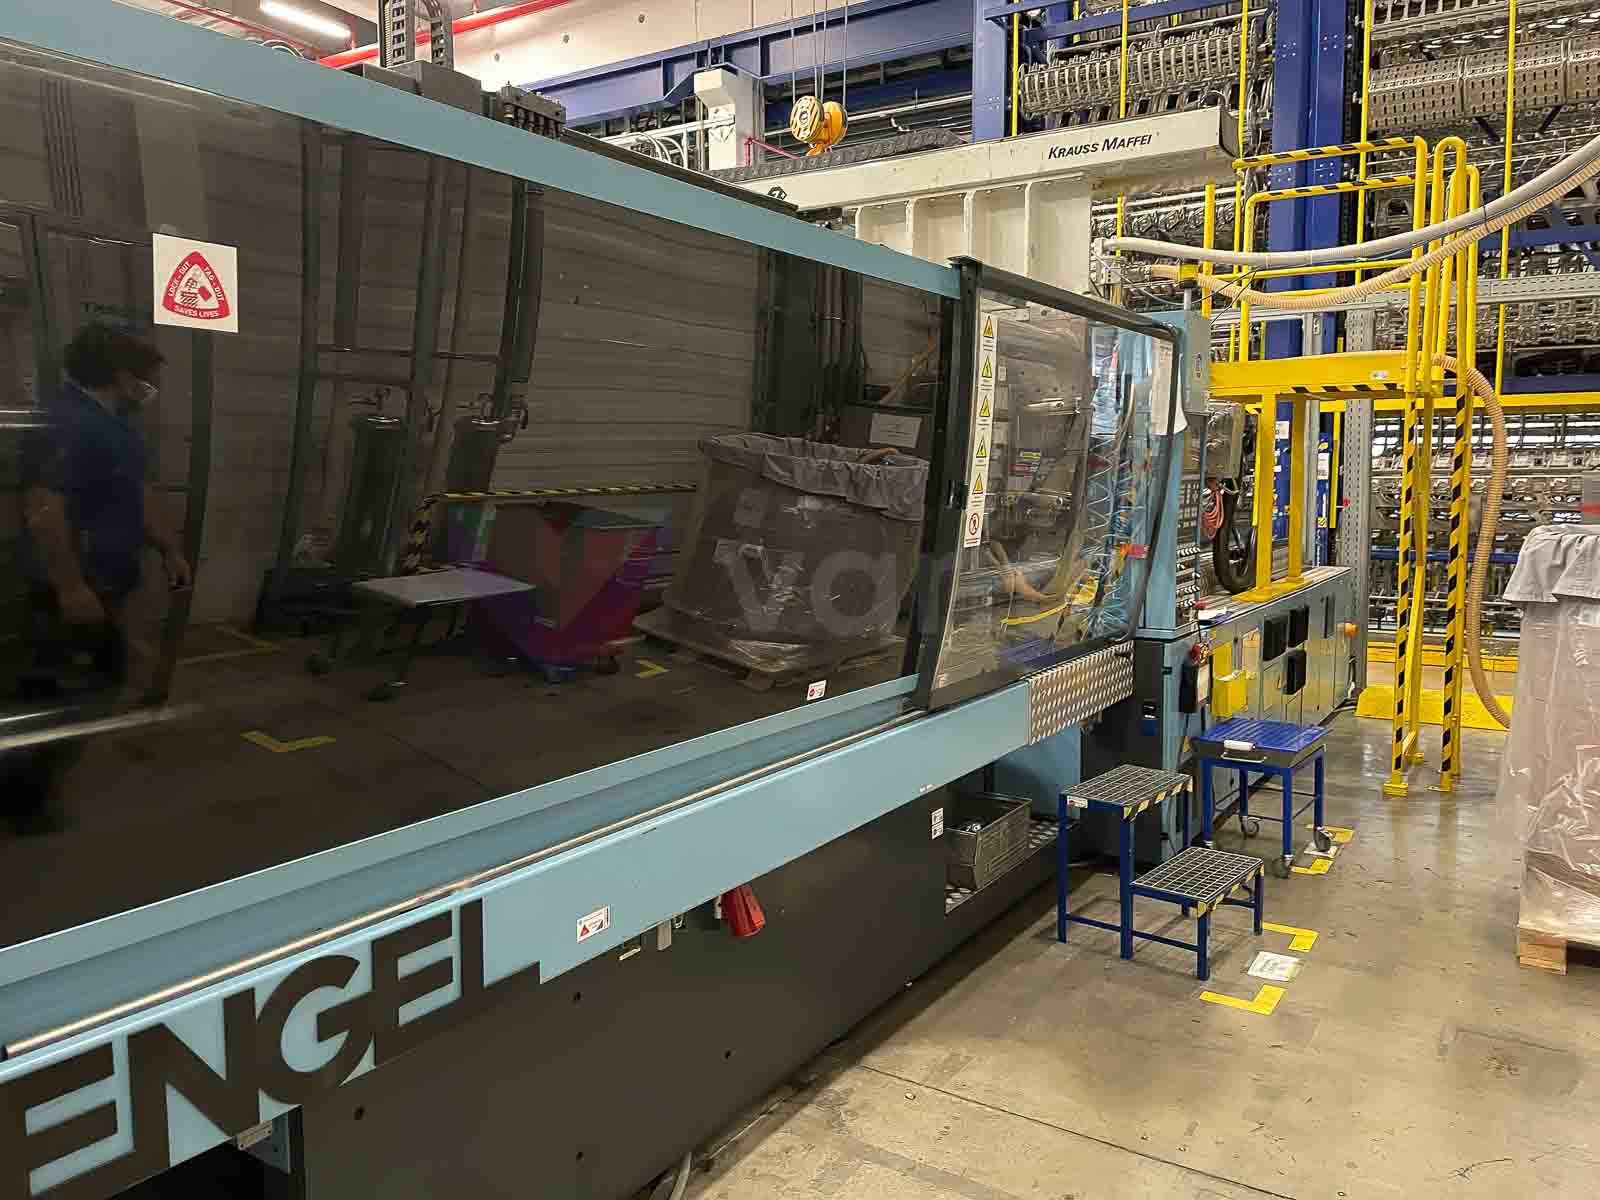 ENGEL CL 1350 / 350 350t injection molding machine (2003) id10687